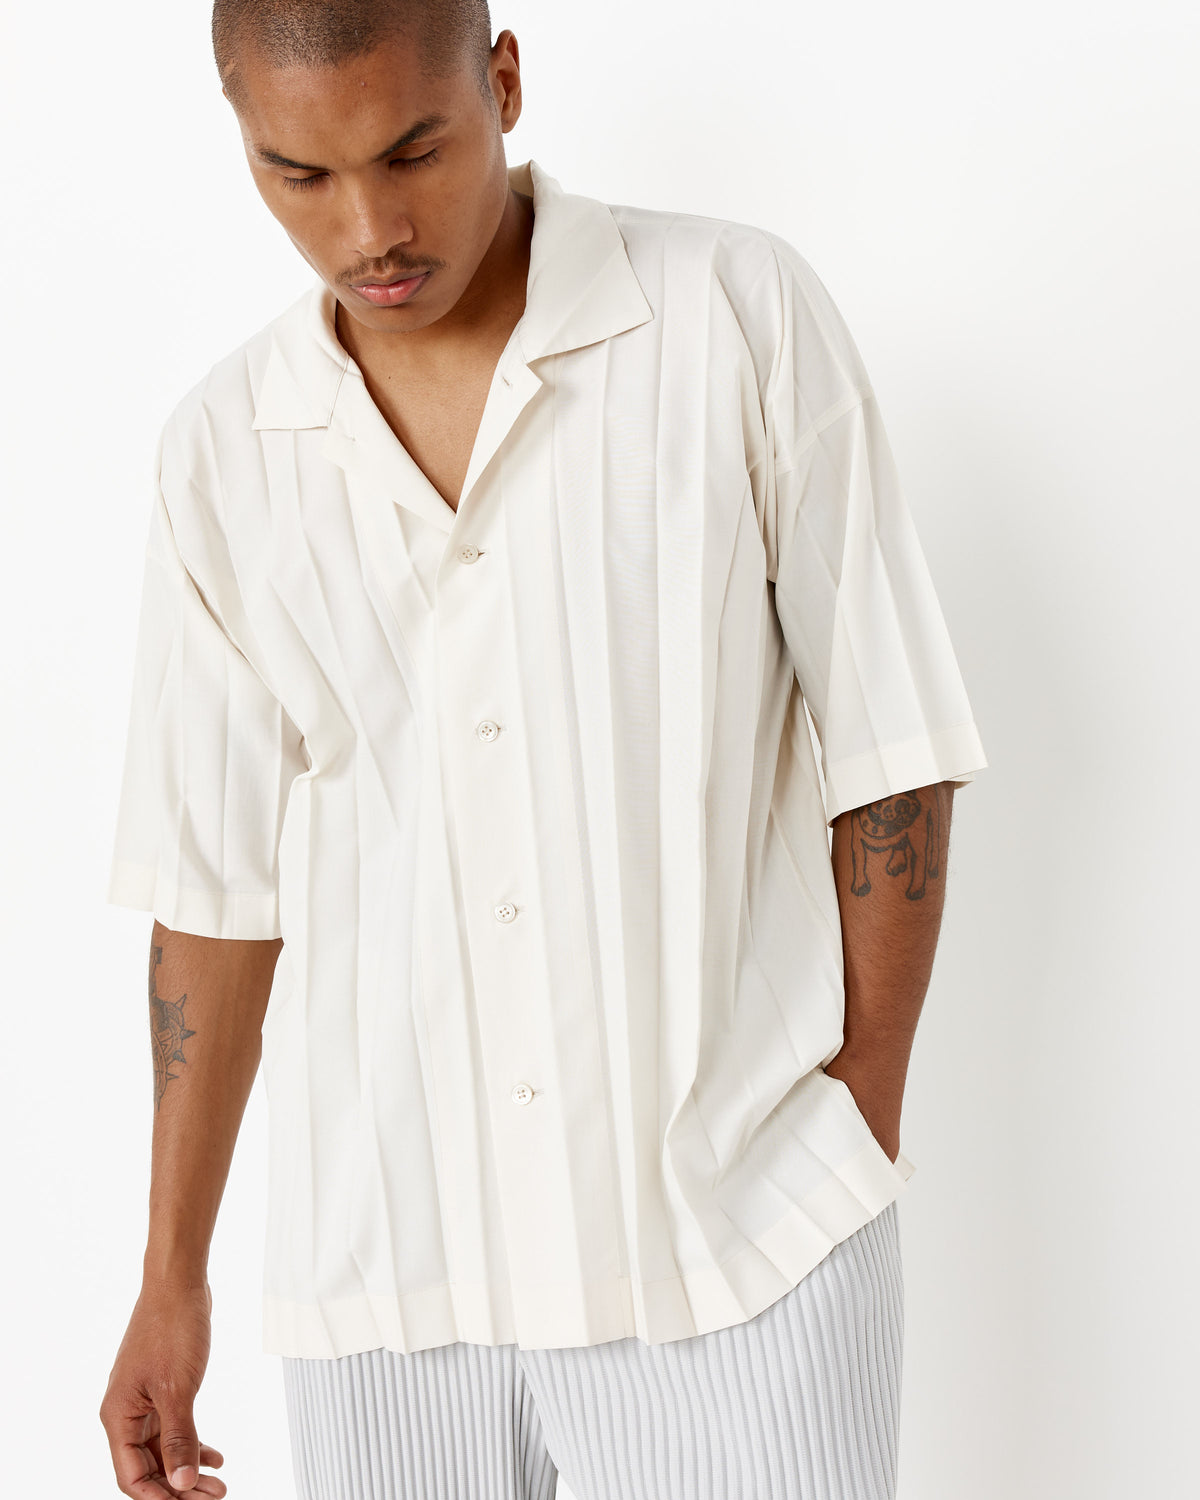 Shop Edge Shirt Homme Plissé Issey Miyake and save big! Find the